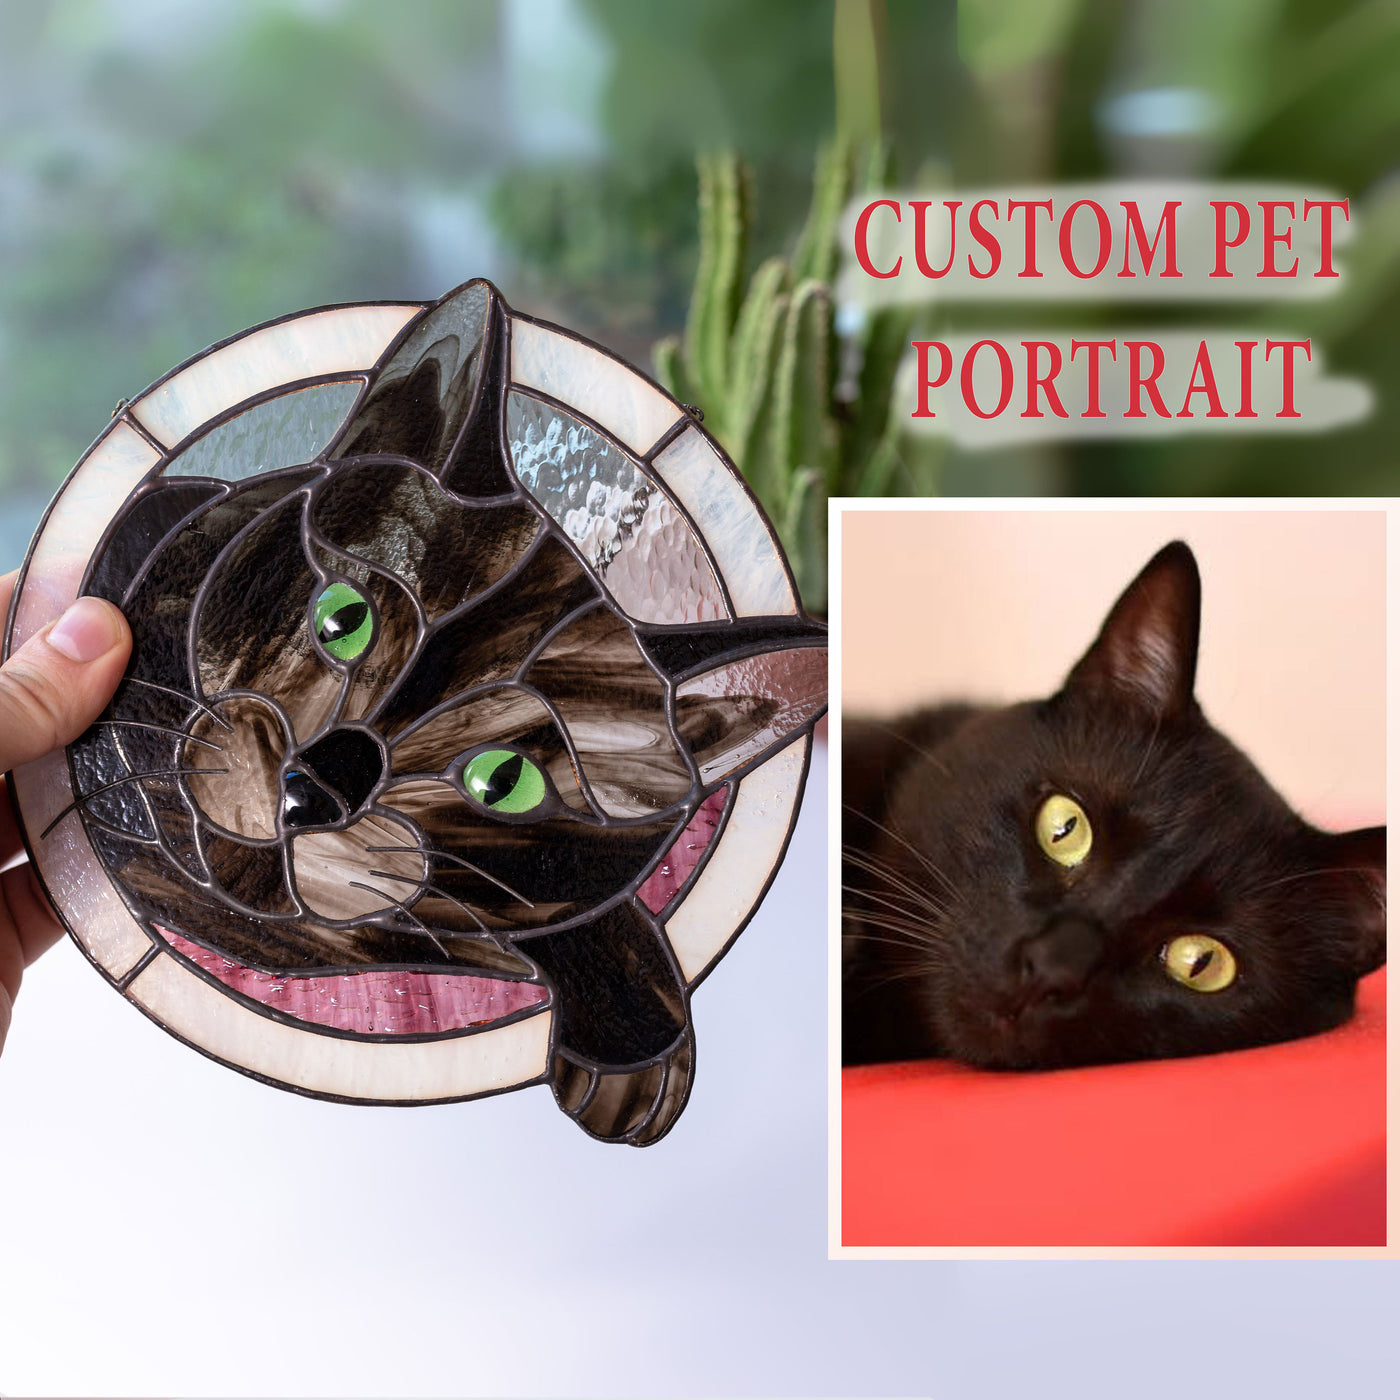 Cute stained glass custom pet portrait of a cat